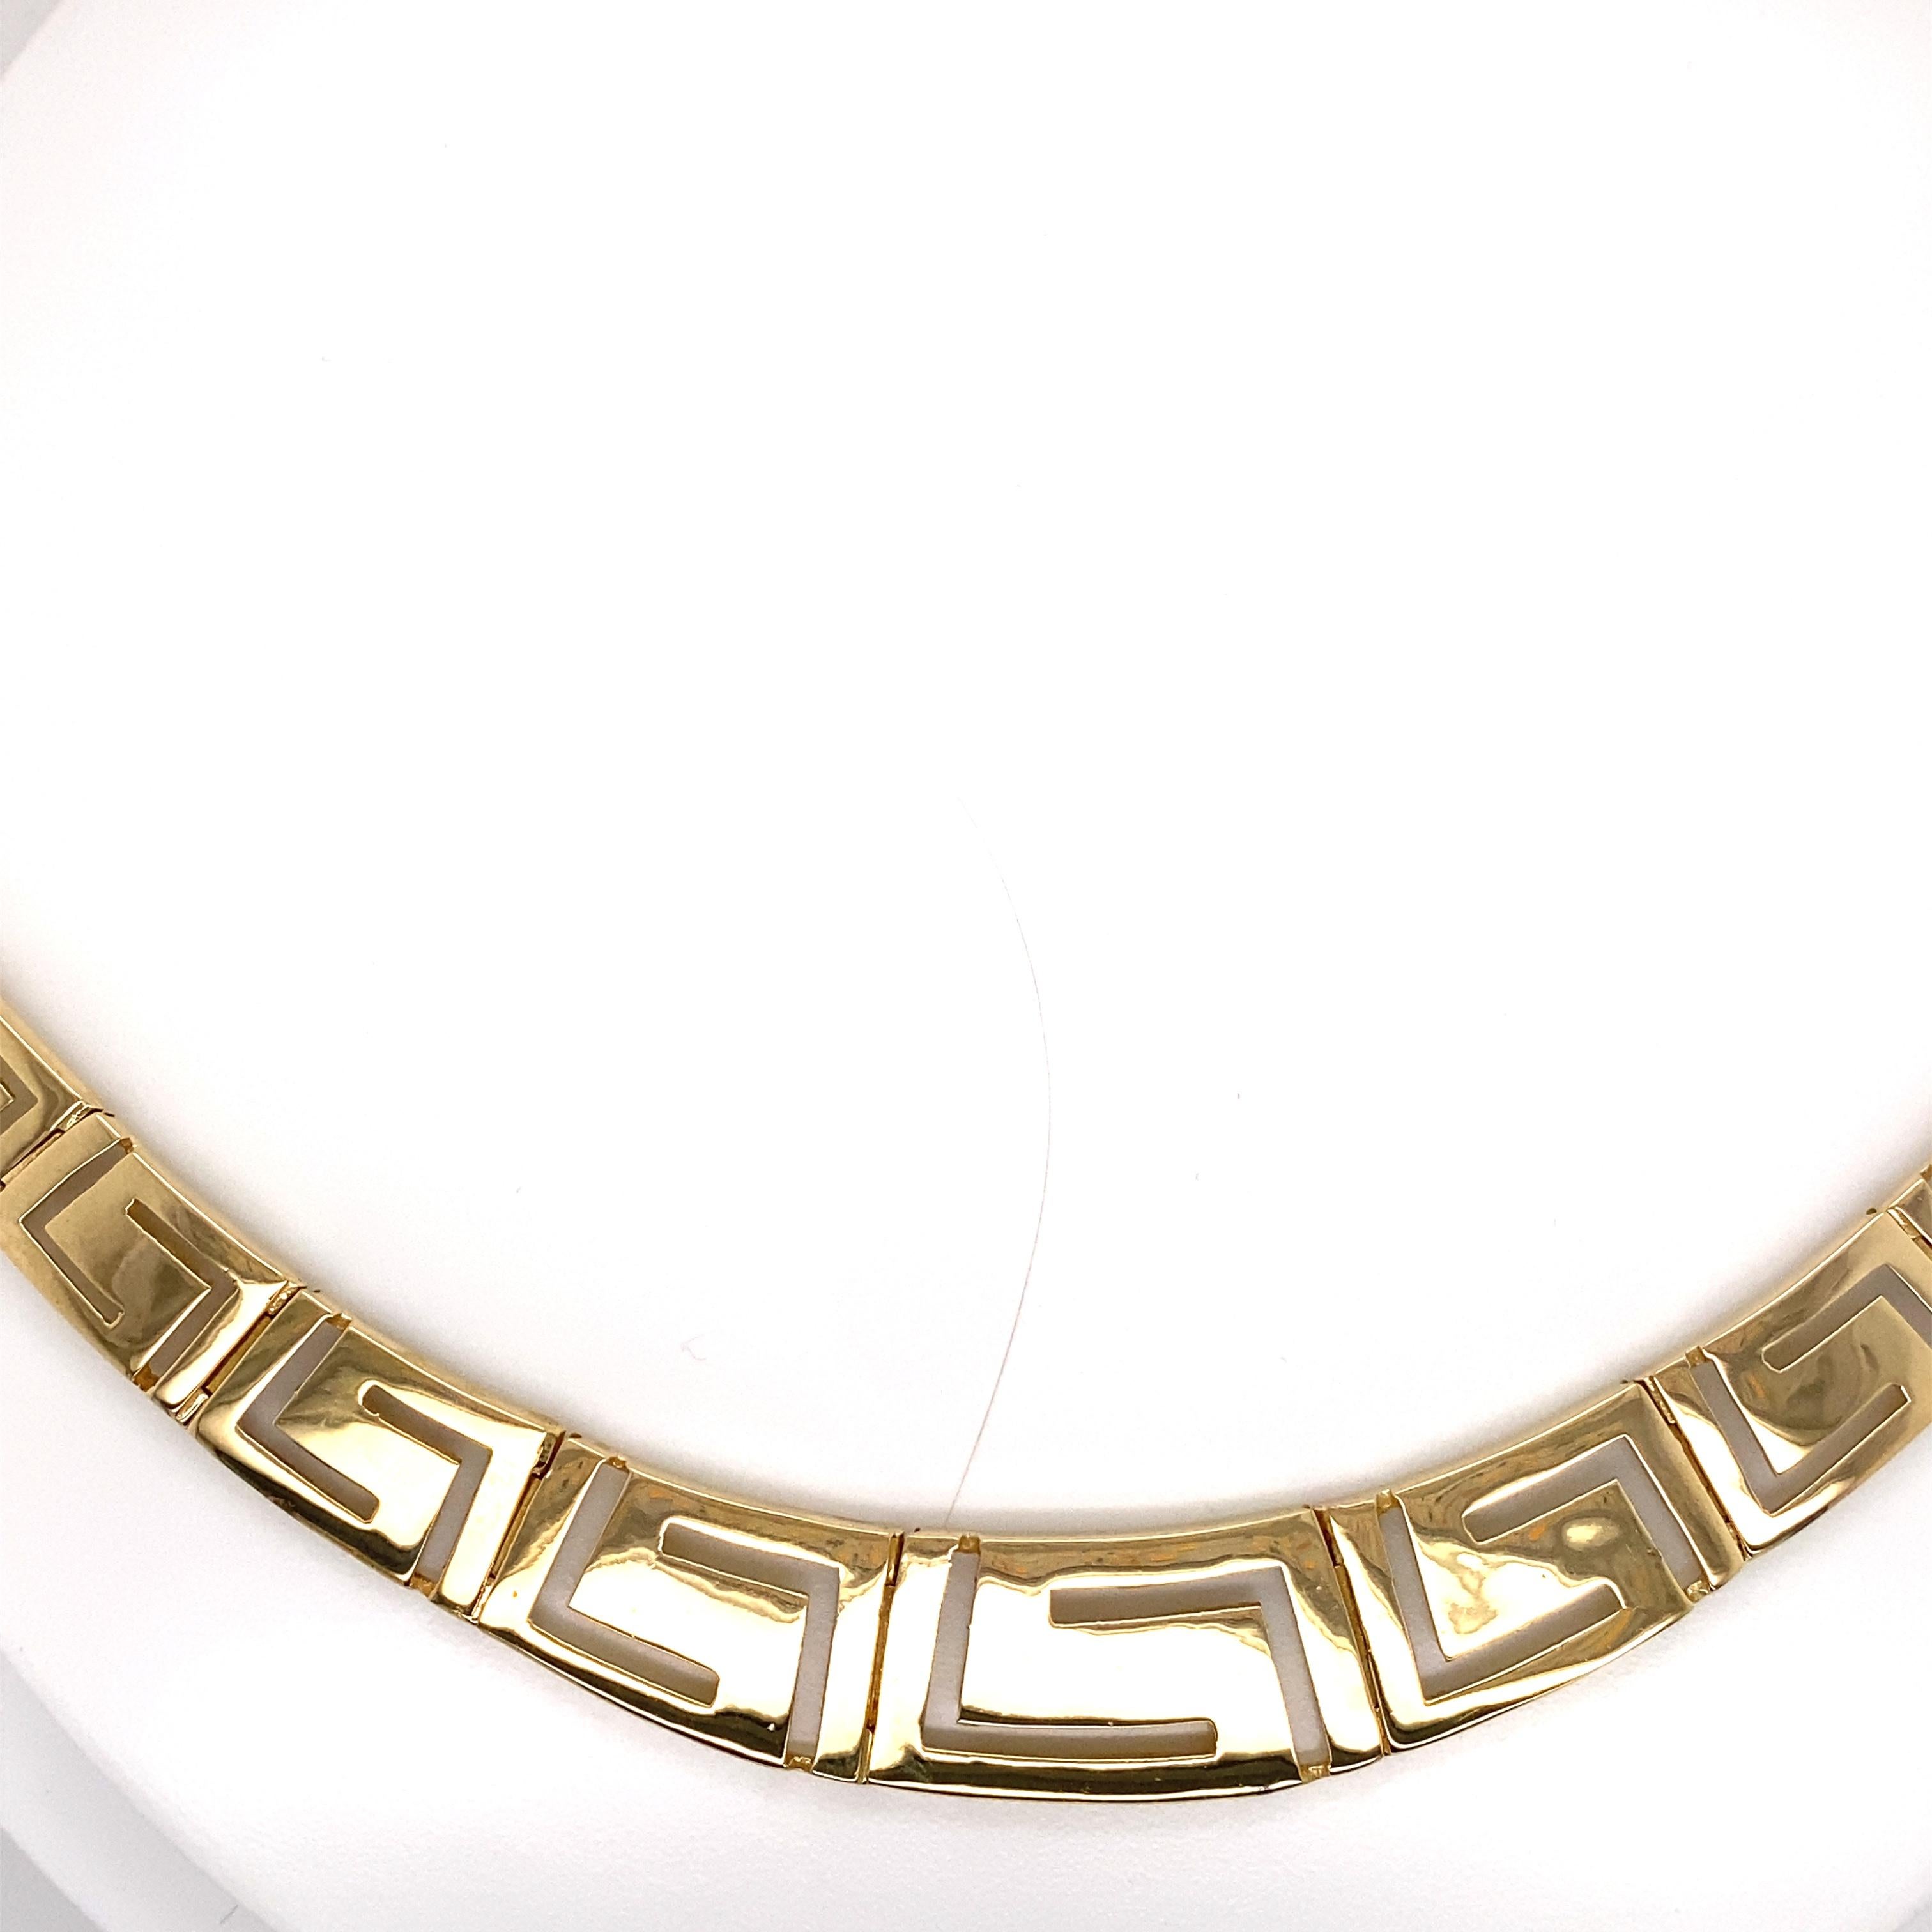 Vintage 1990’s 14K Yellow Gold Greek Key Necklace - The Greek Key design graduates in width from 15mm in the front to 5mm in the back. The necklace is 17 inches long and features a plunger clasp with a figure 8 safety. The necklace weighs 37.1 grams.